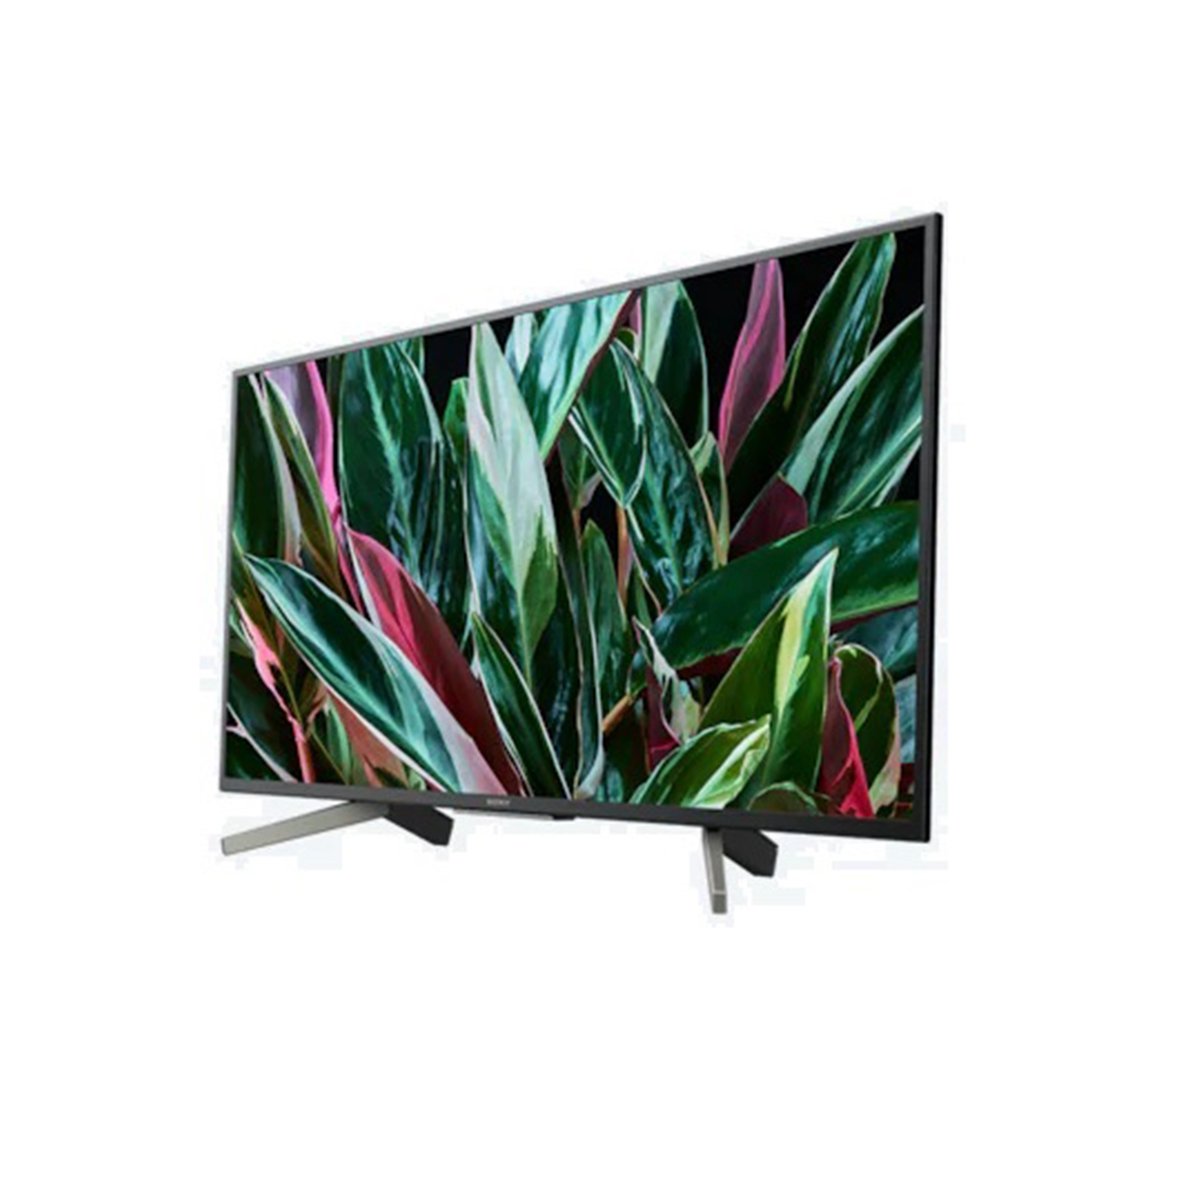 Sony Full HD Android Smart LED TV KDL43W800G 43"